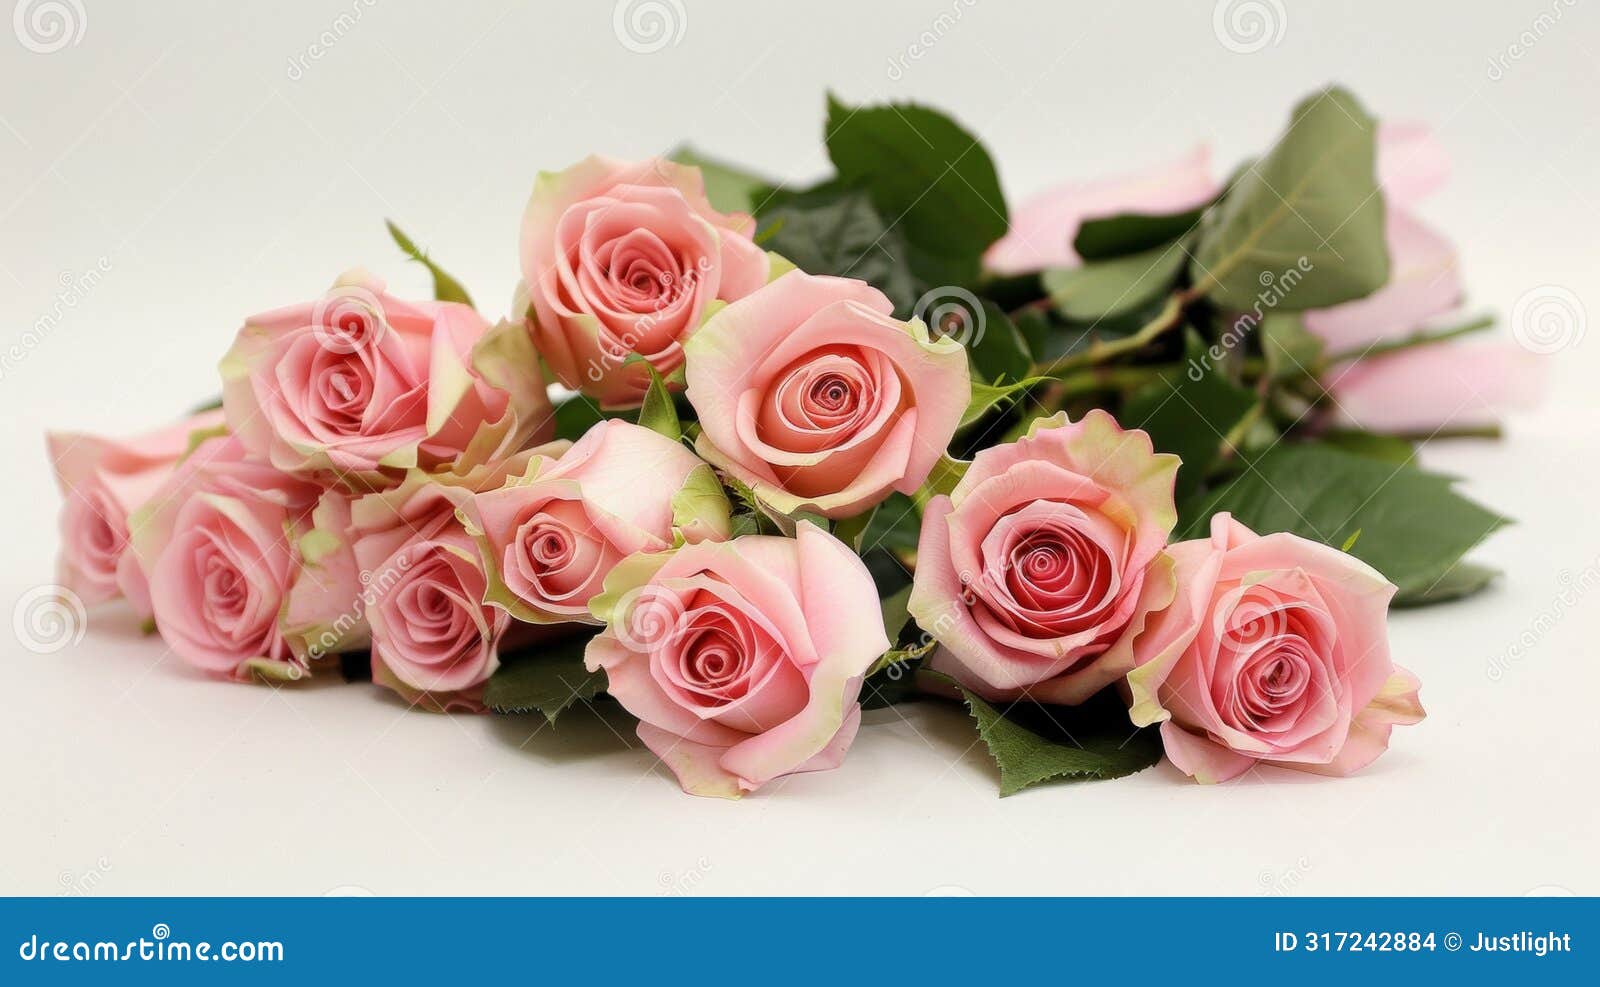 the air is filled with the scent of freshly roses the most popular flower gifted on valentines day